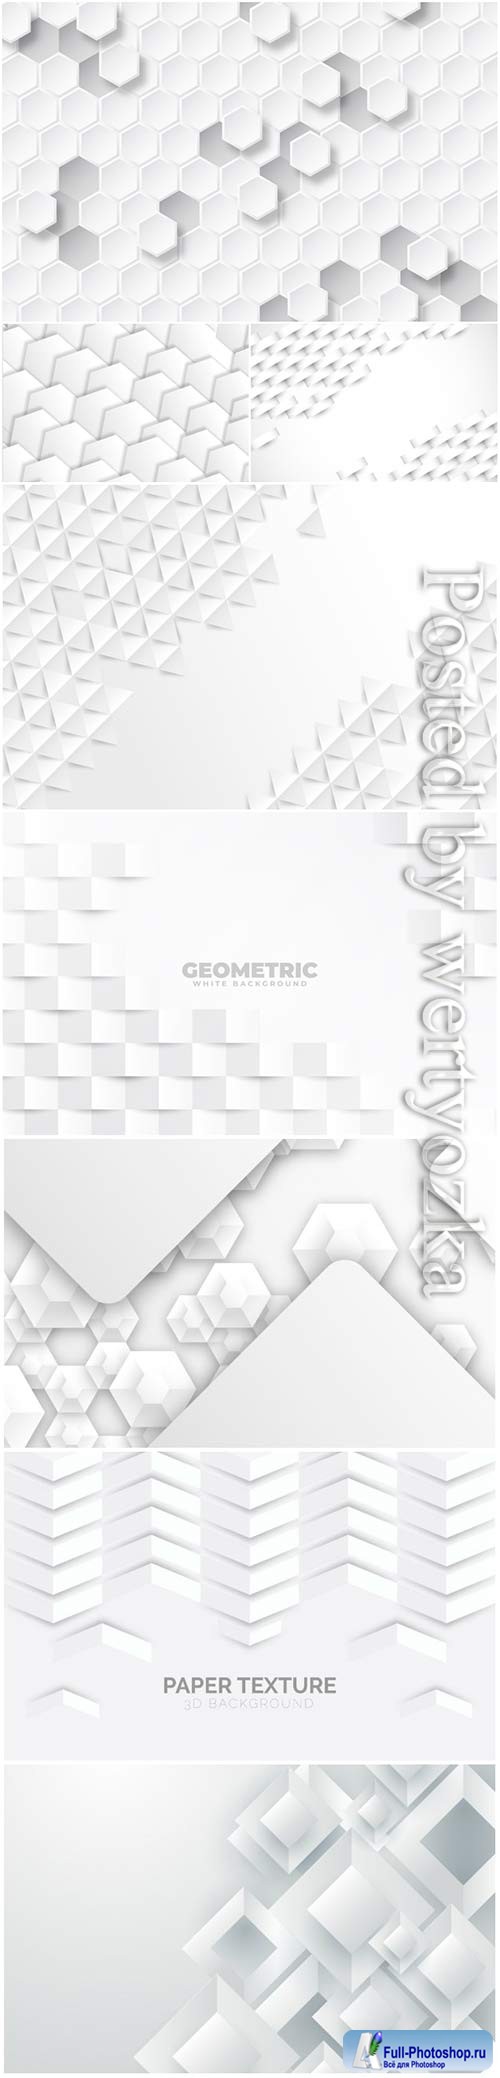 Abstract vector background, 3d models template # 2